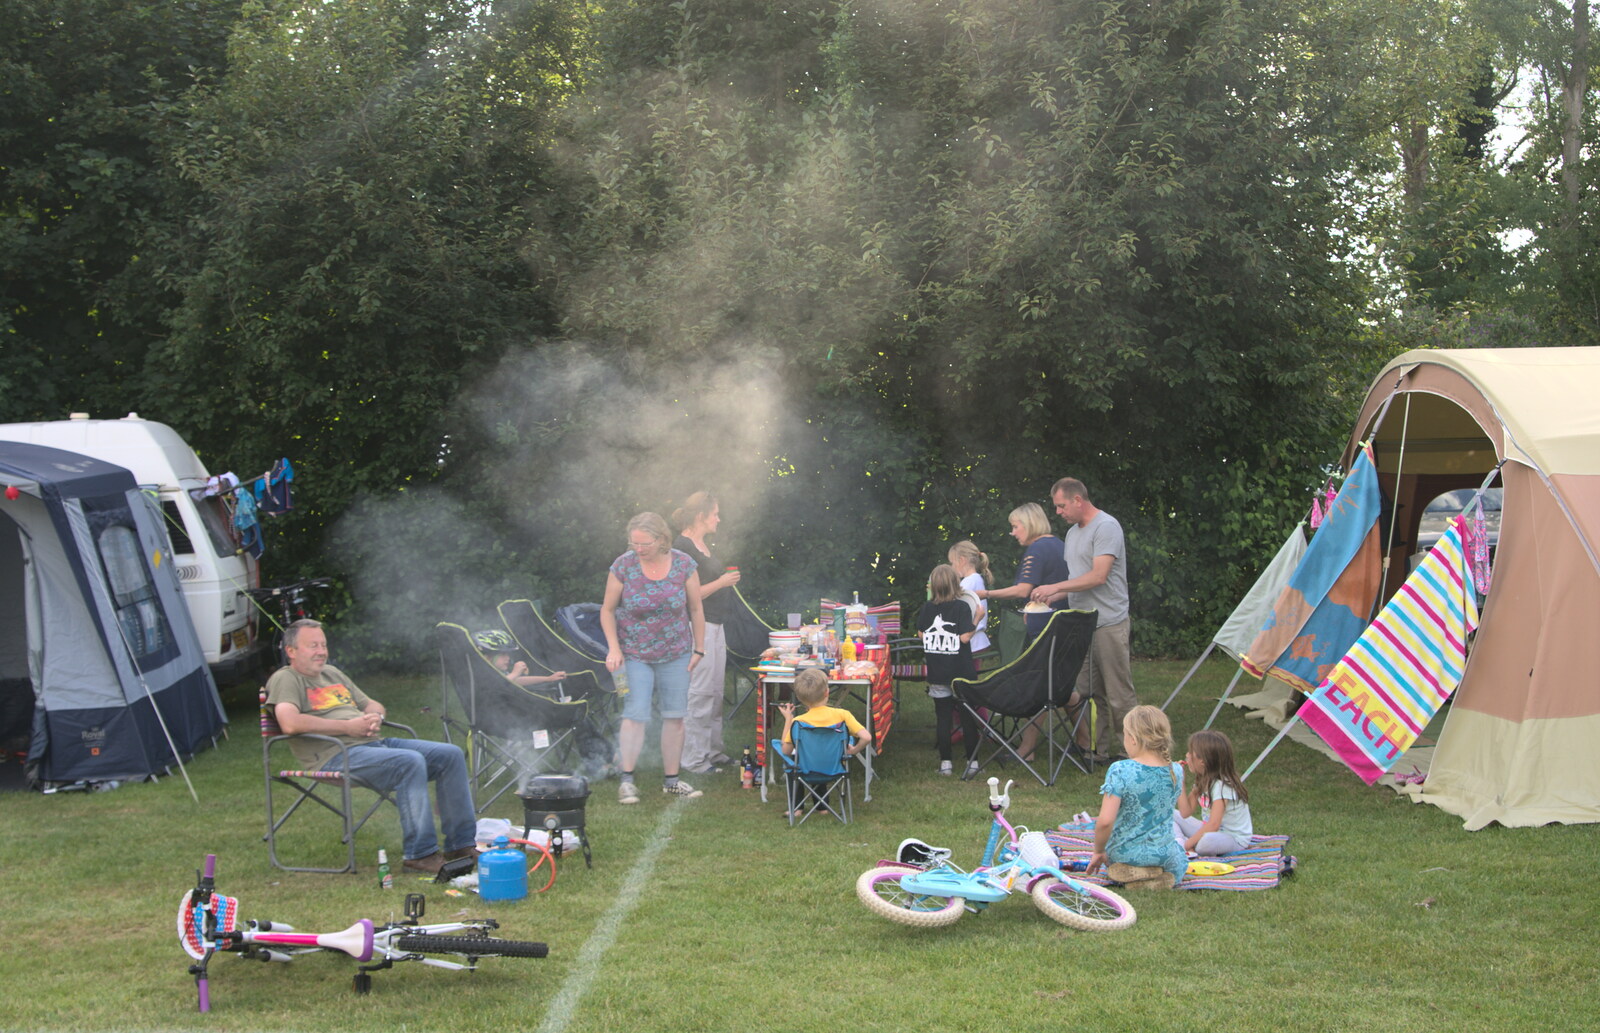 There's a lot of smoke coming from a barbeque from Camping at Dower House, West Harling, Norfolk - 1st July 2017